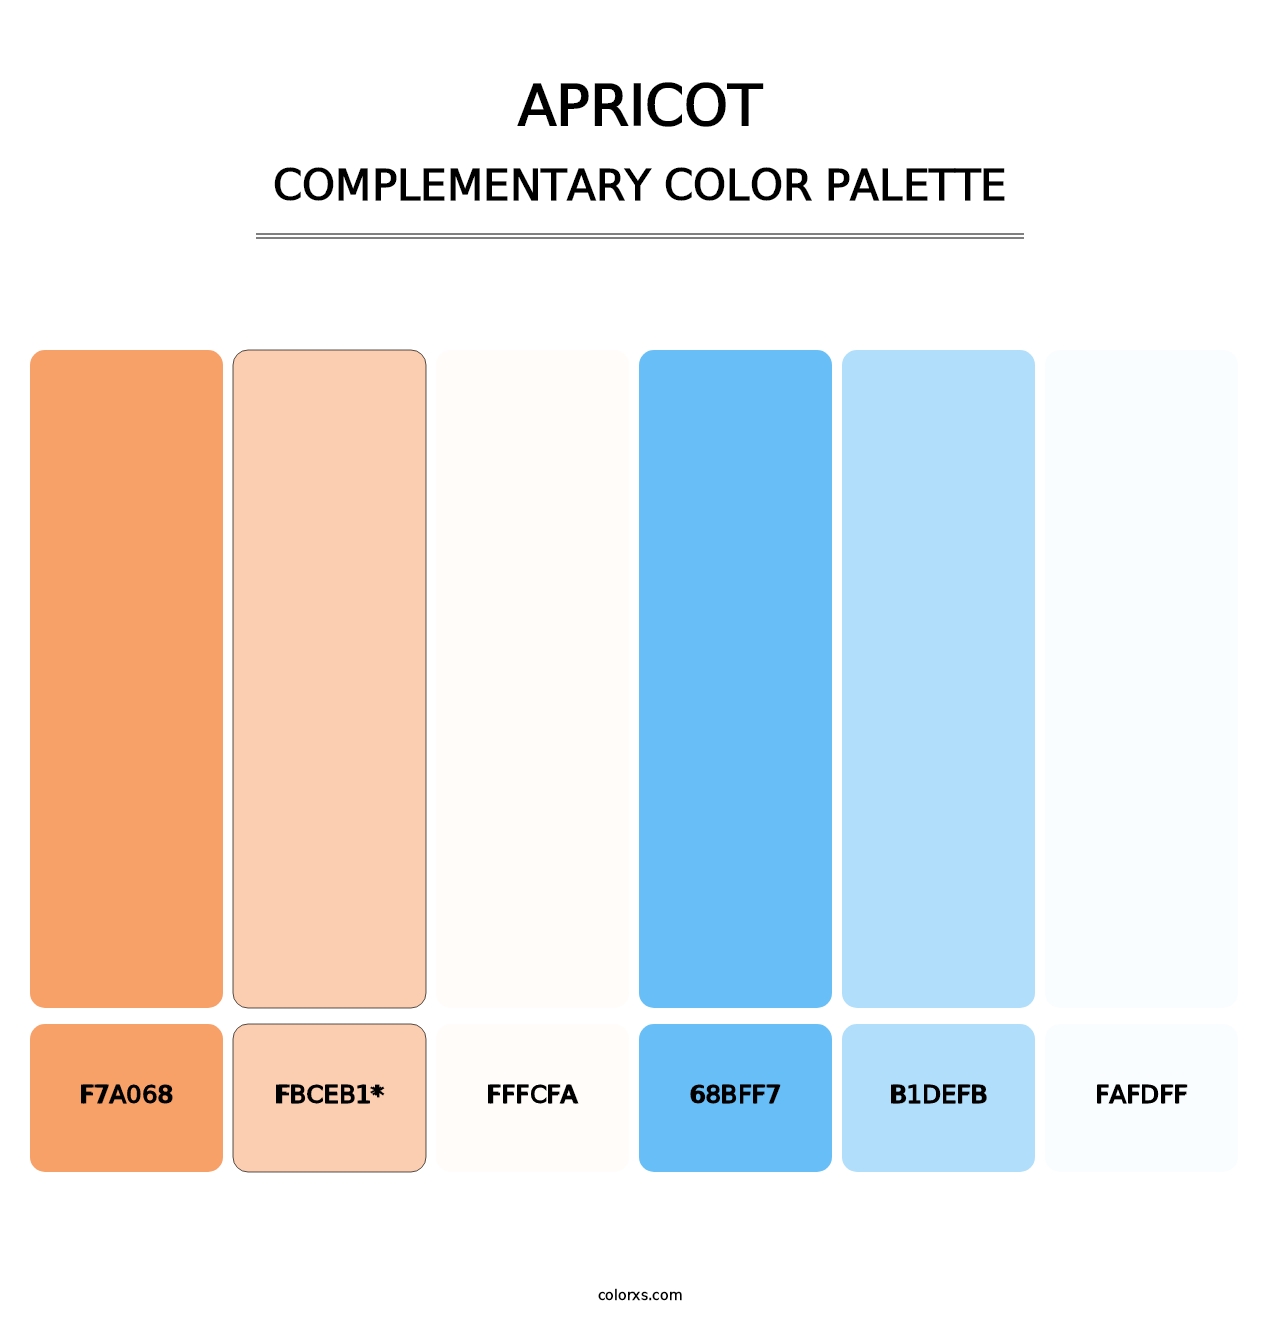 Apricot - Complementary Color Palette